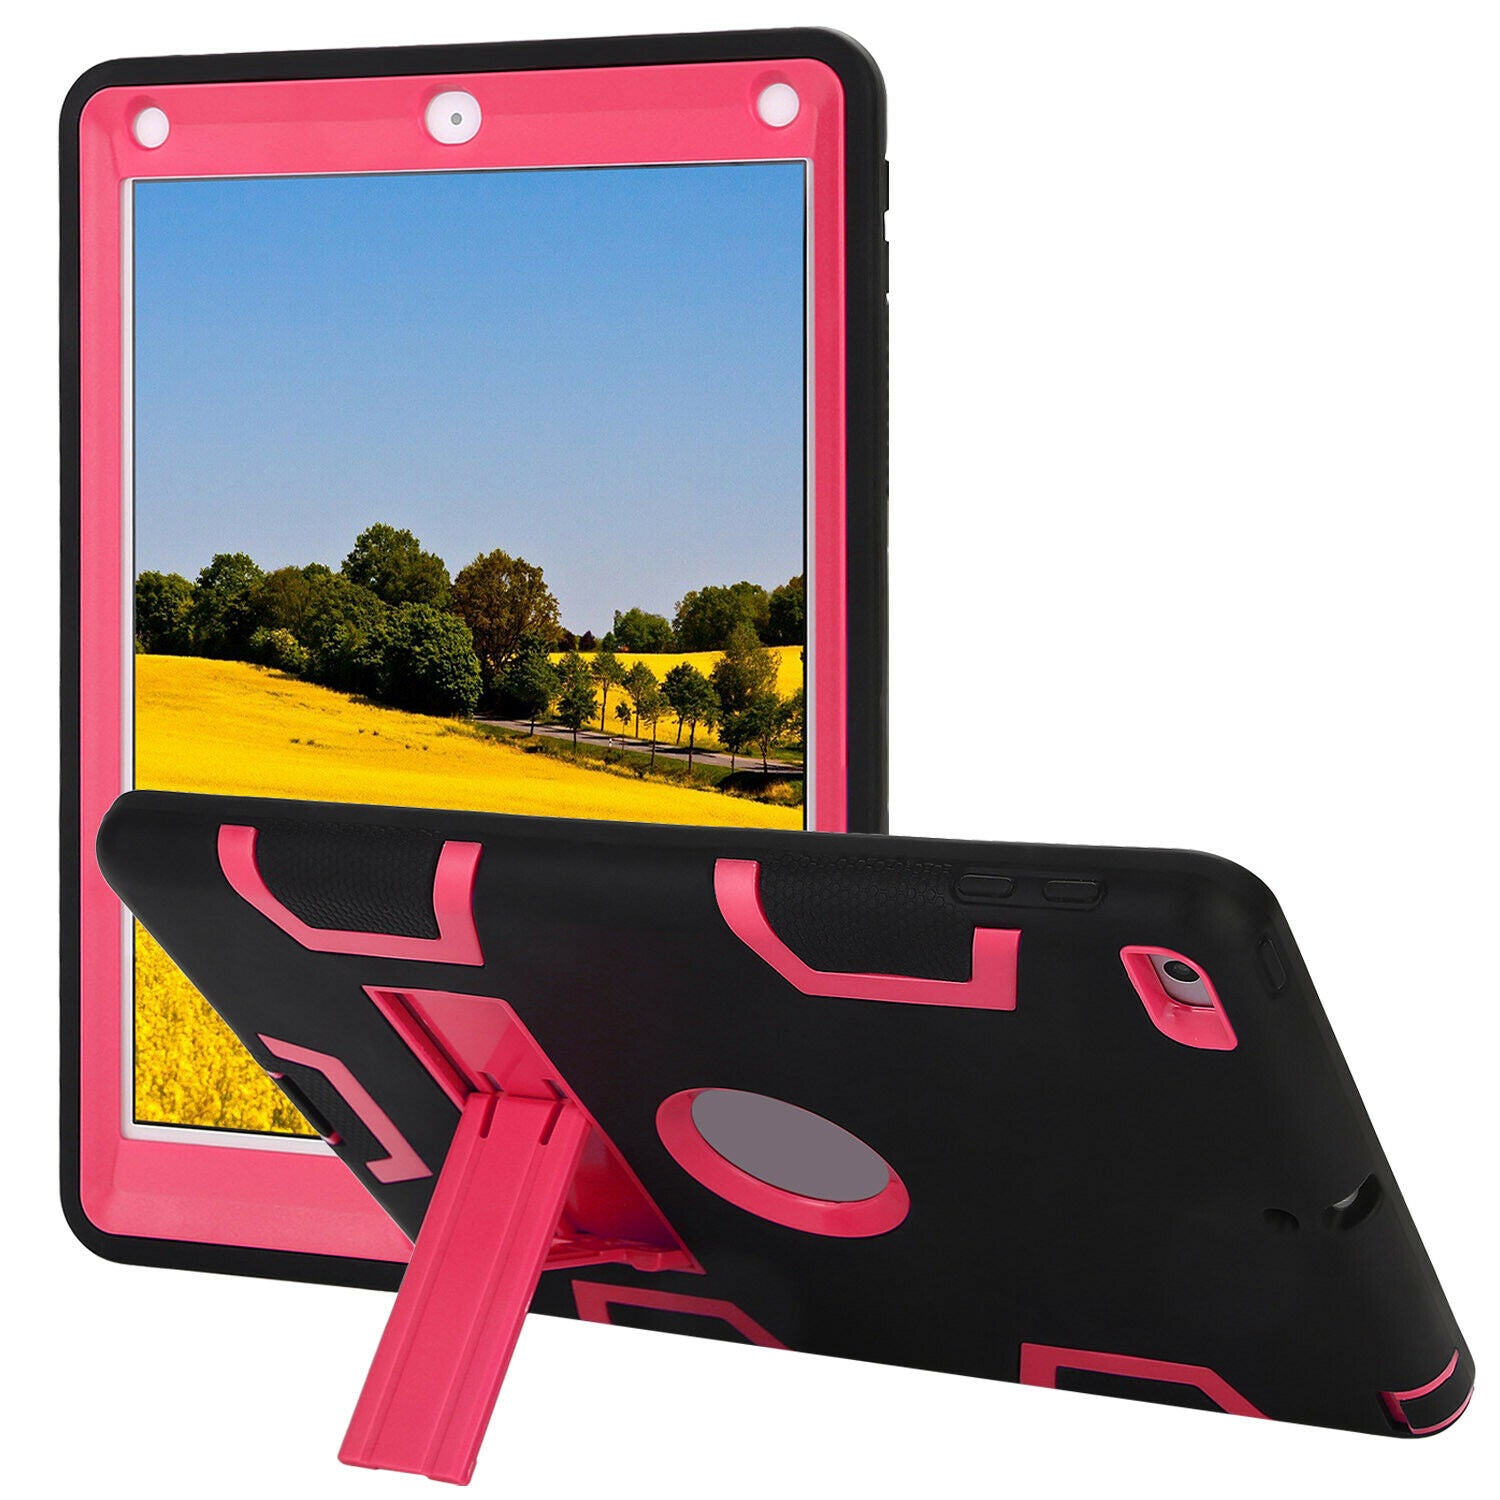 Kids Shockproof Case Heavy Duty Tough Kick Stand Cover for iPad 2 3 4